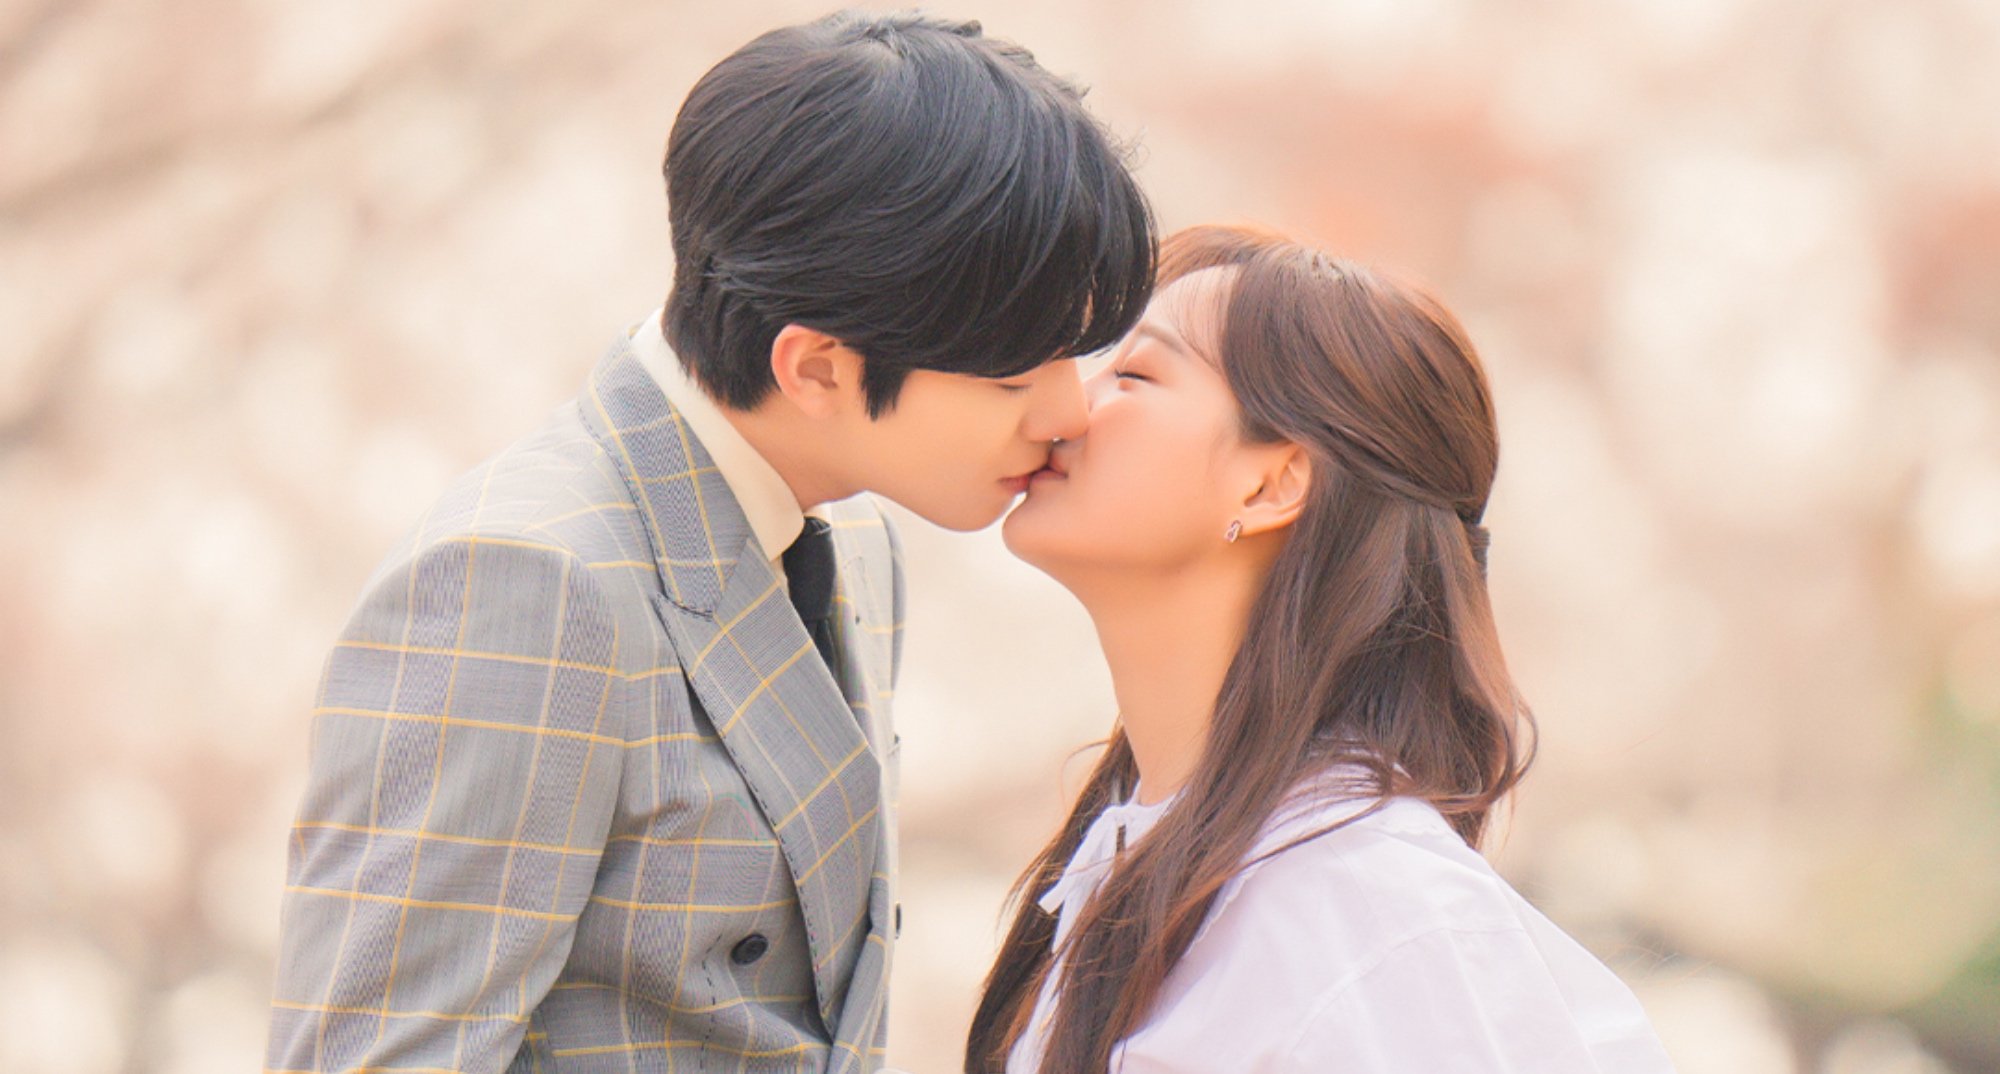 Characters Tae-mu and Ha-ri in 'Business Proposal' finale kissing in relation to webtoon.